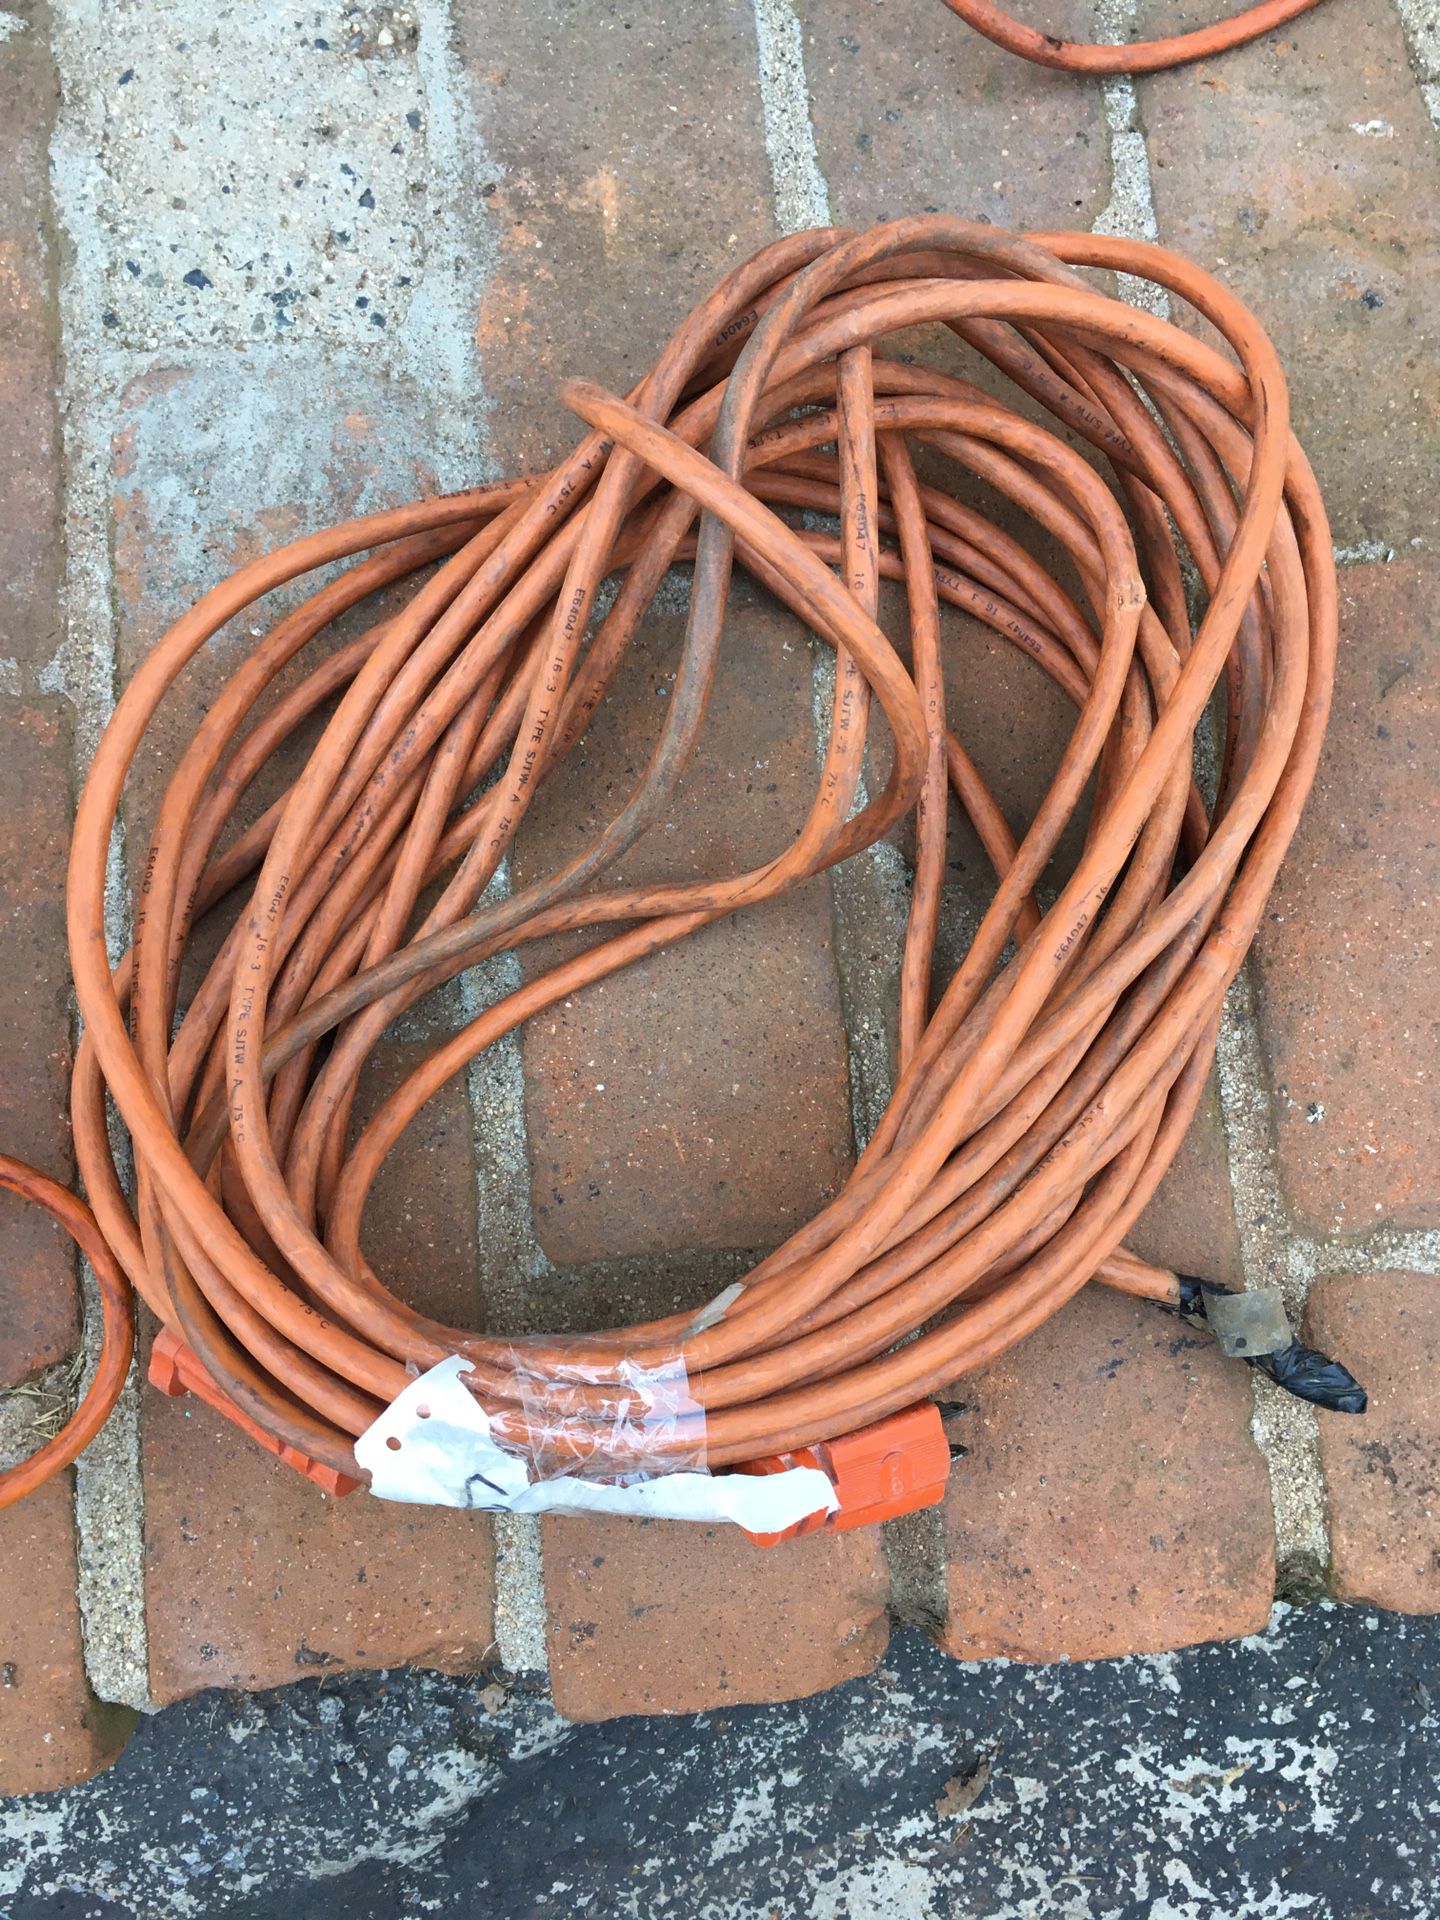 Thick Extension Cords 50 Feet (EACH), for trimmers and hedgers and all kinds of safe electric uses! NOTE: wires have been taped and knotted for S